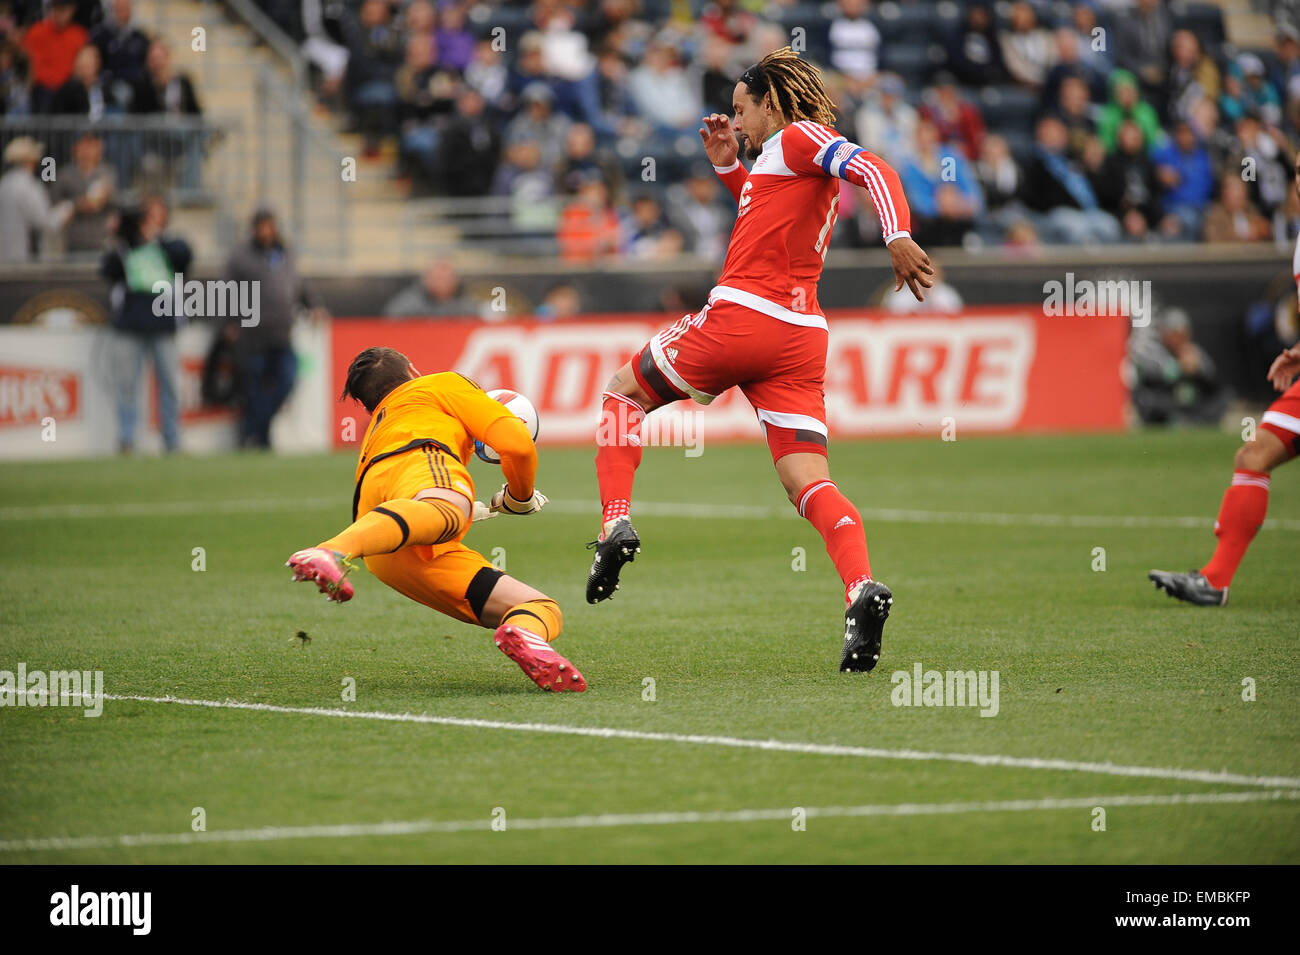 Chester, Pennsylvania, USA. 19th Apr, 2015. New England Revolution's midfielder, JERMAINE JONES (13) goes for ta goal during the match against the Union The Revolution beat the Union 2-1 at PPL Park in Chester Pa Credit:  Ricky Fitchett/ZUMA Wire/Alamy Live News Stock Photo